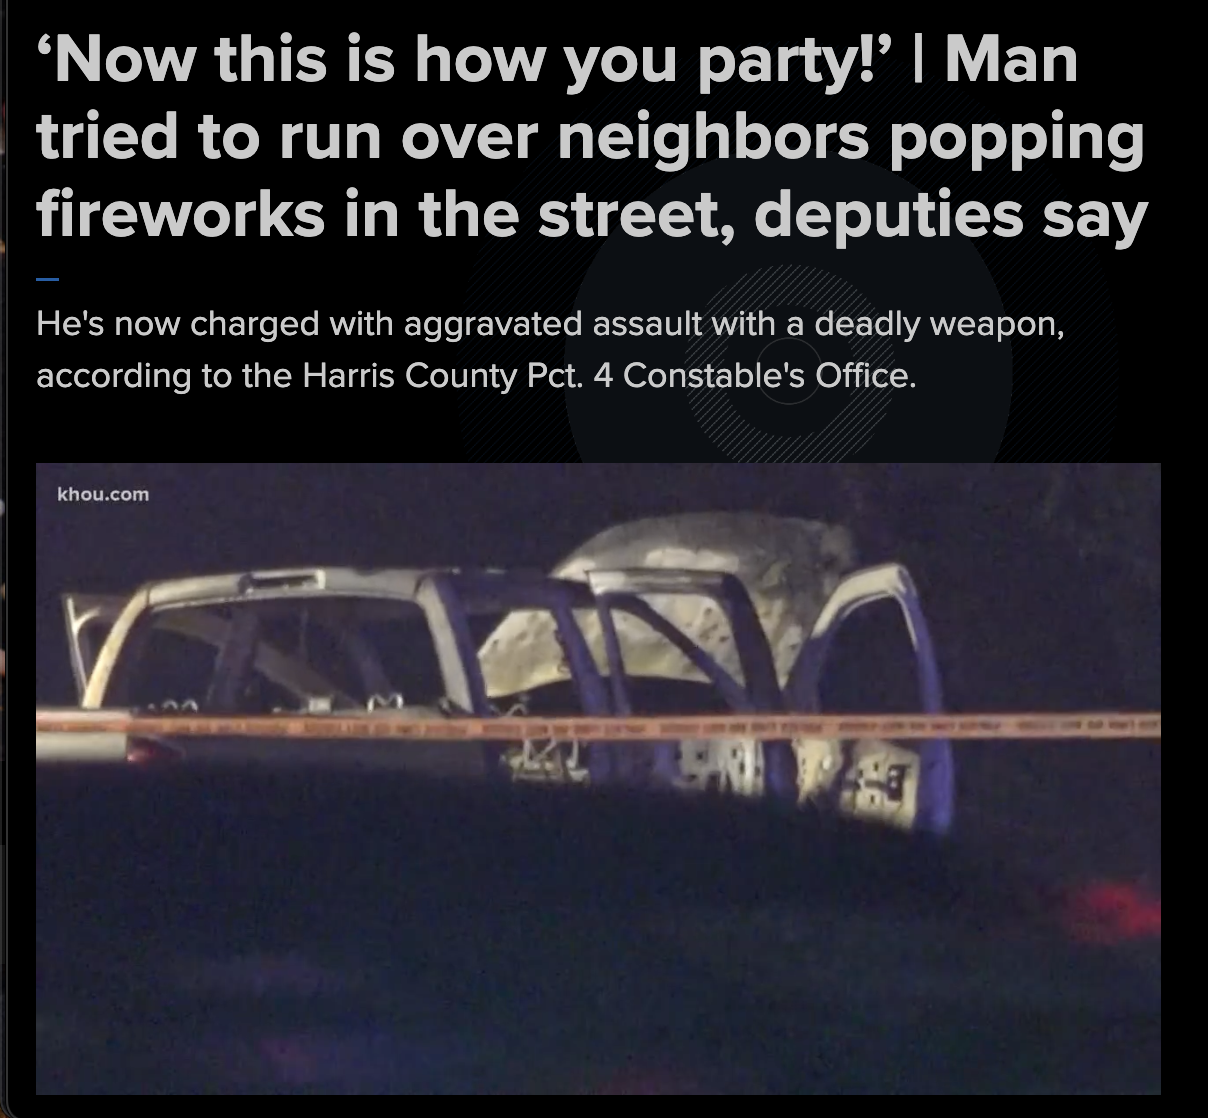 microvan - 'Now this is how you party!' | Man tried to run over neighbors popping fireworks in the street, deputies say He's now charged with aggravated assault with a deadly weapon, according to the Harris County Pct. 4 Constable's Office. khou.com